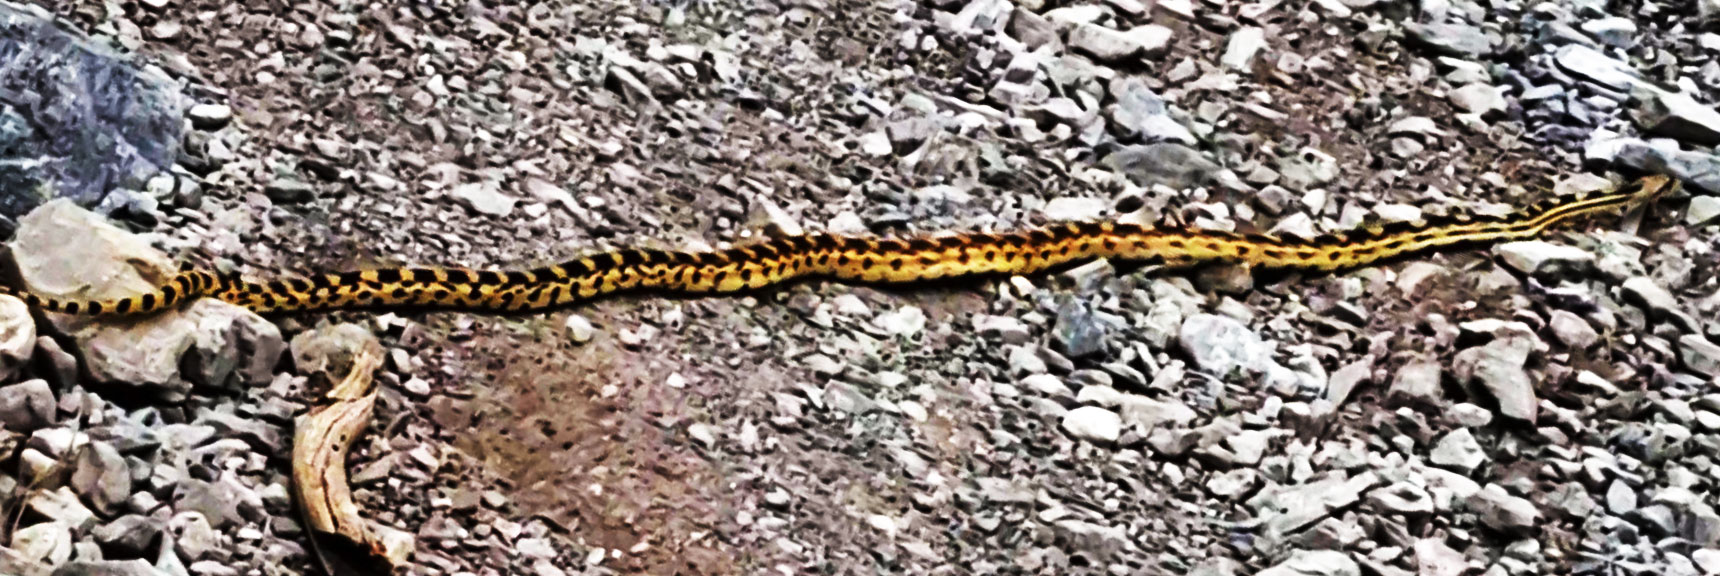 Western Gopher Snake (Blow Snake) (Pituophis catenifer) | Fletcher Canyon, Nevada